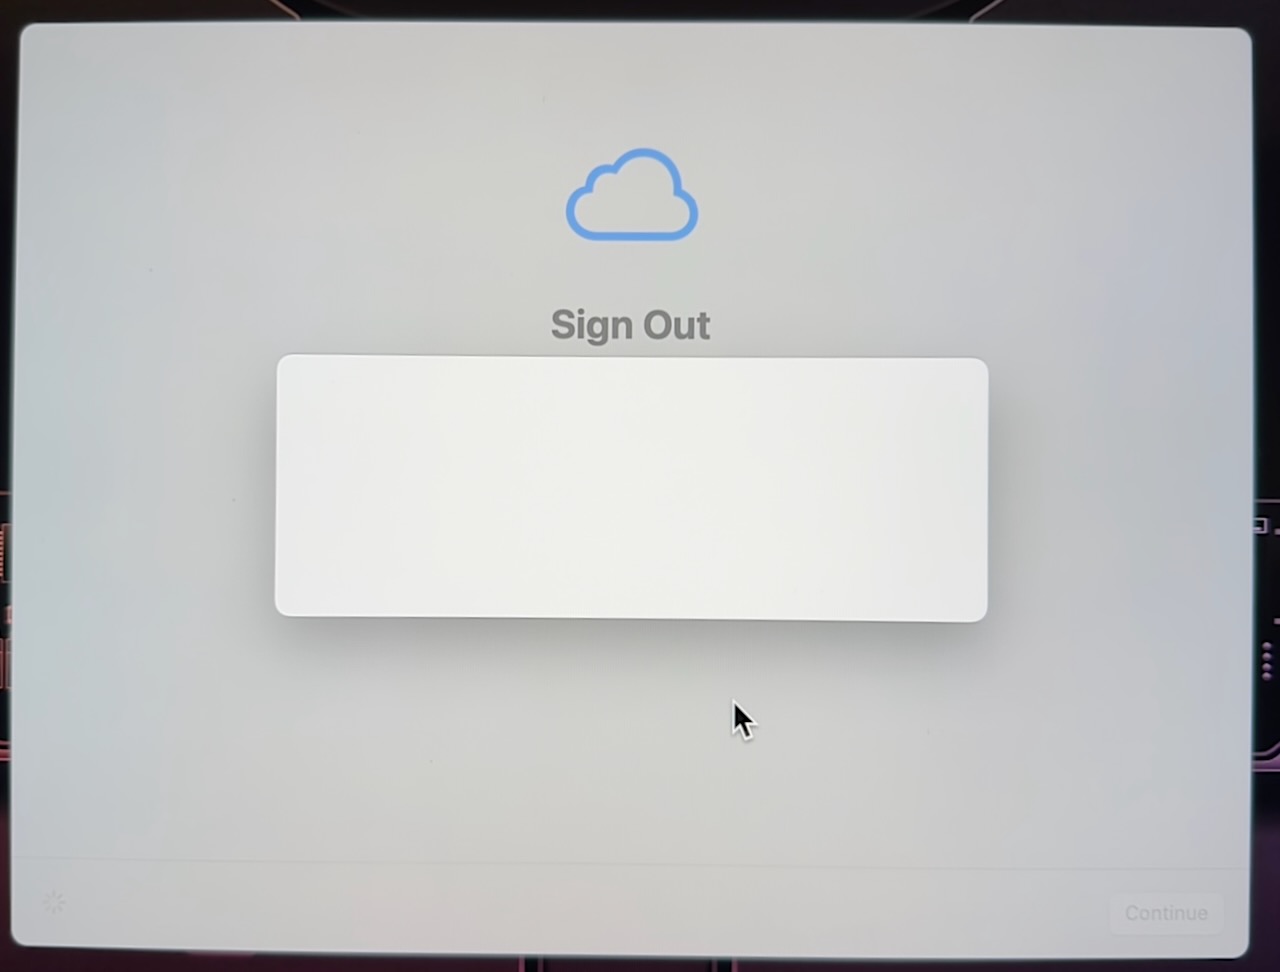 Sign Out Blank Screen